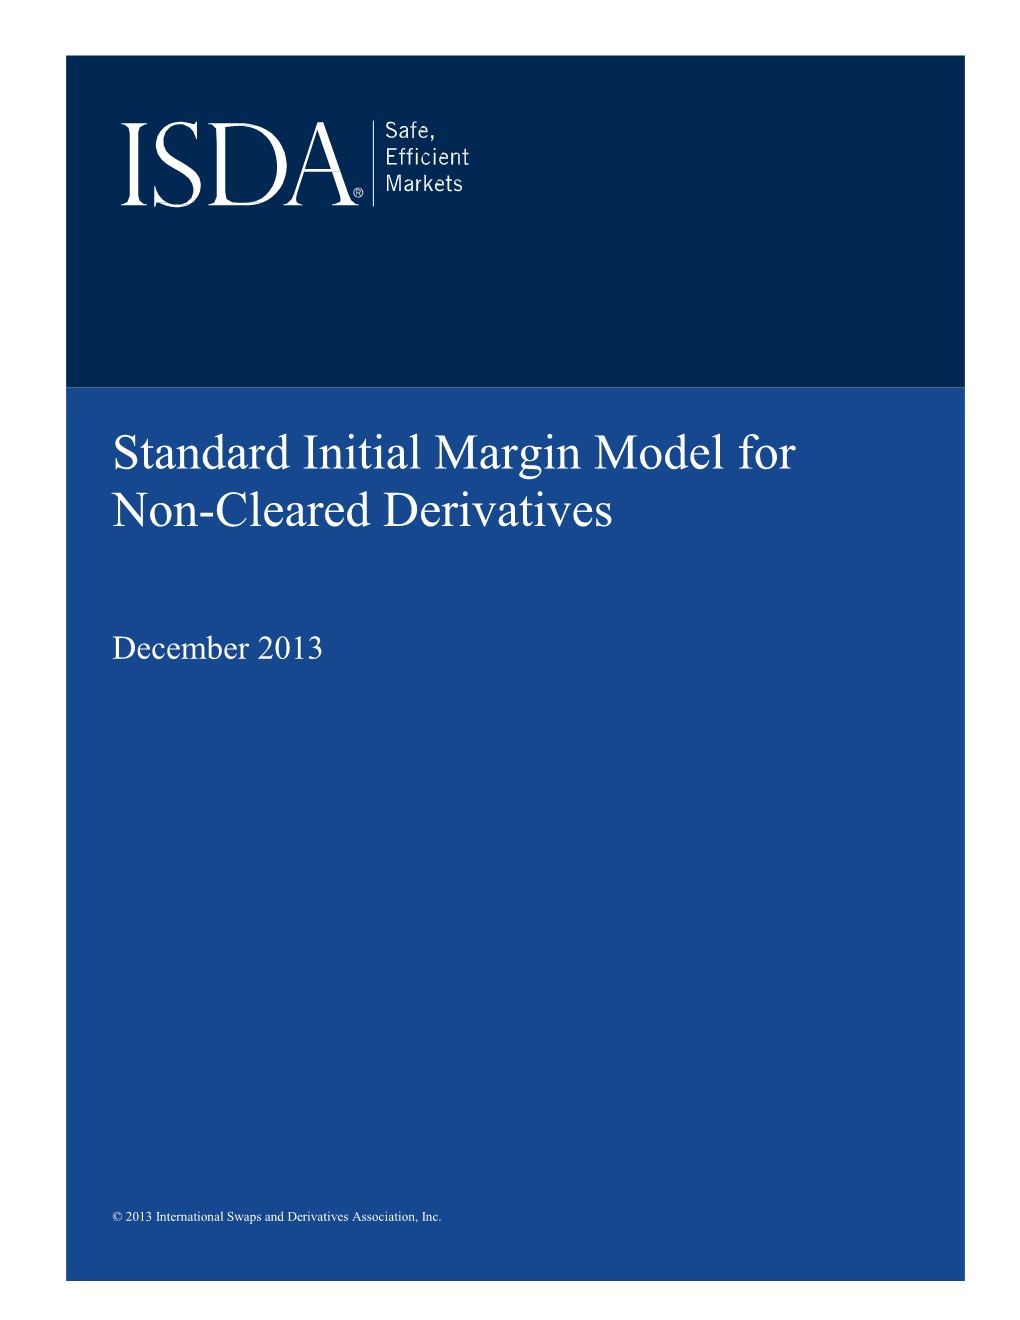 Standard Initial Margin Model (SIMM) for Non-Cleared Derivatives